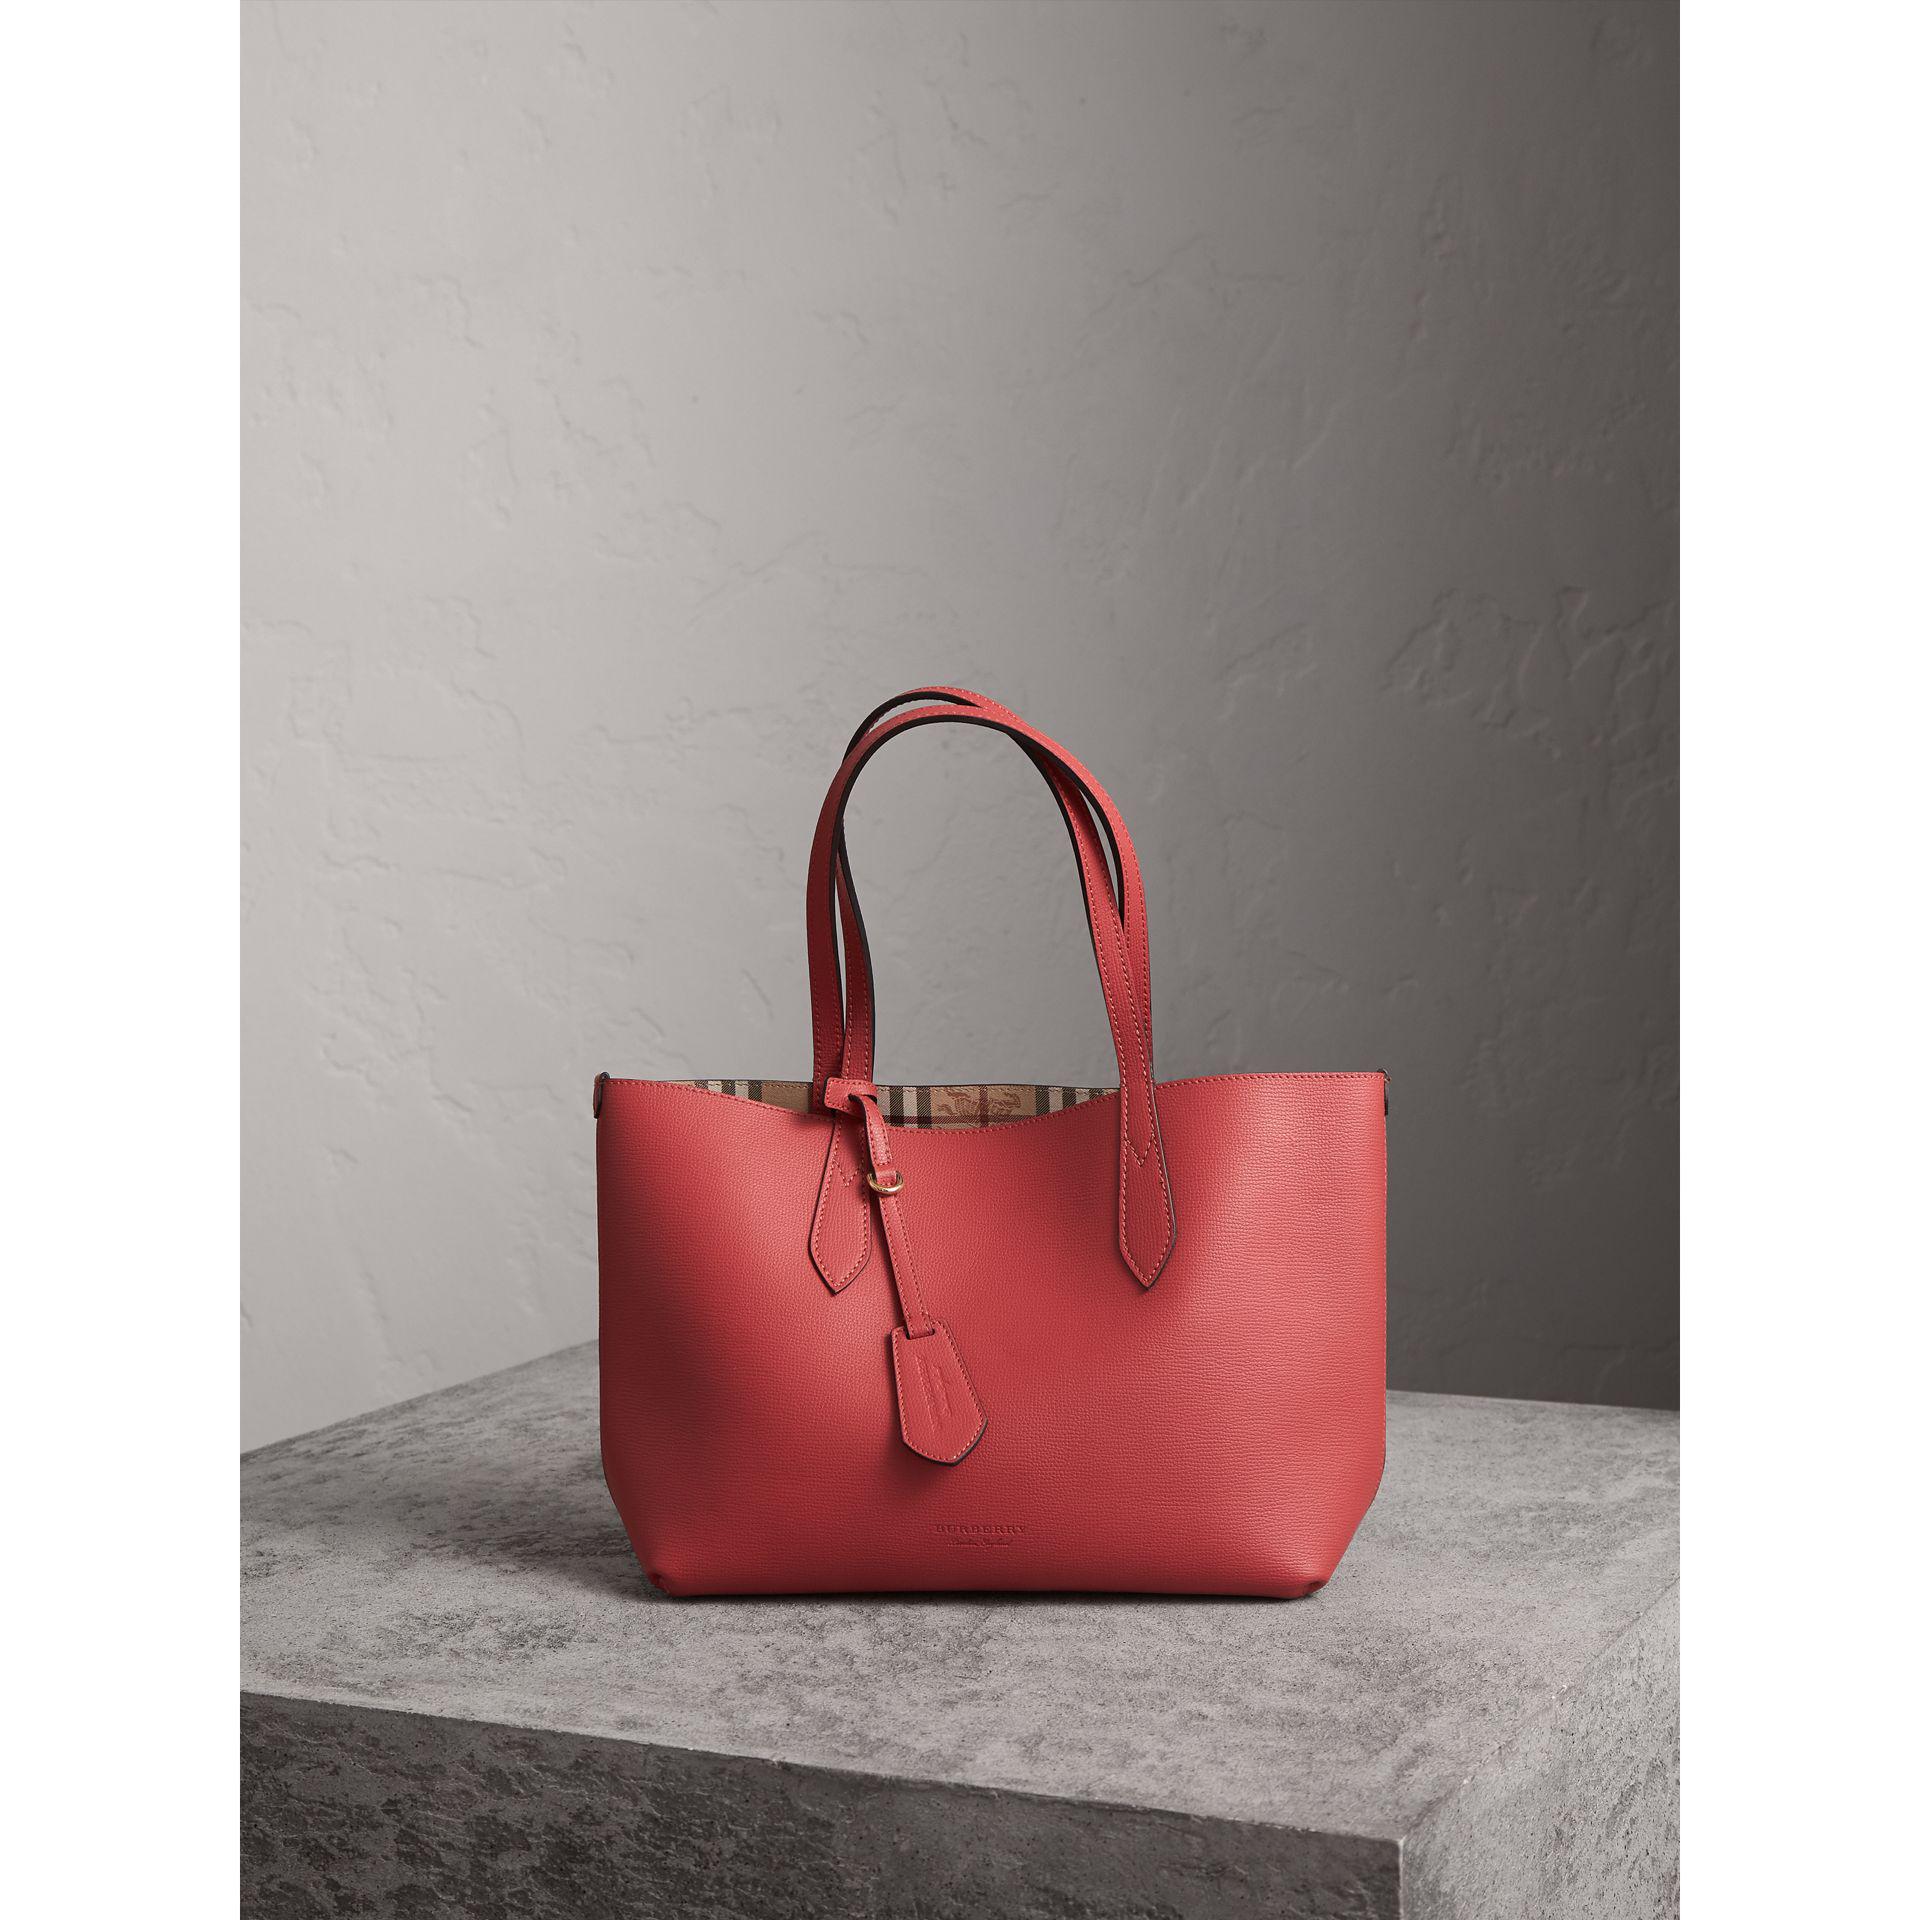 Burberry The Medium Reversible Tote In Haymarket Check And Leather Coral  Red